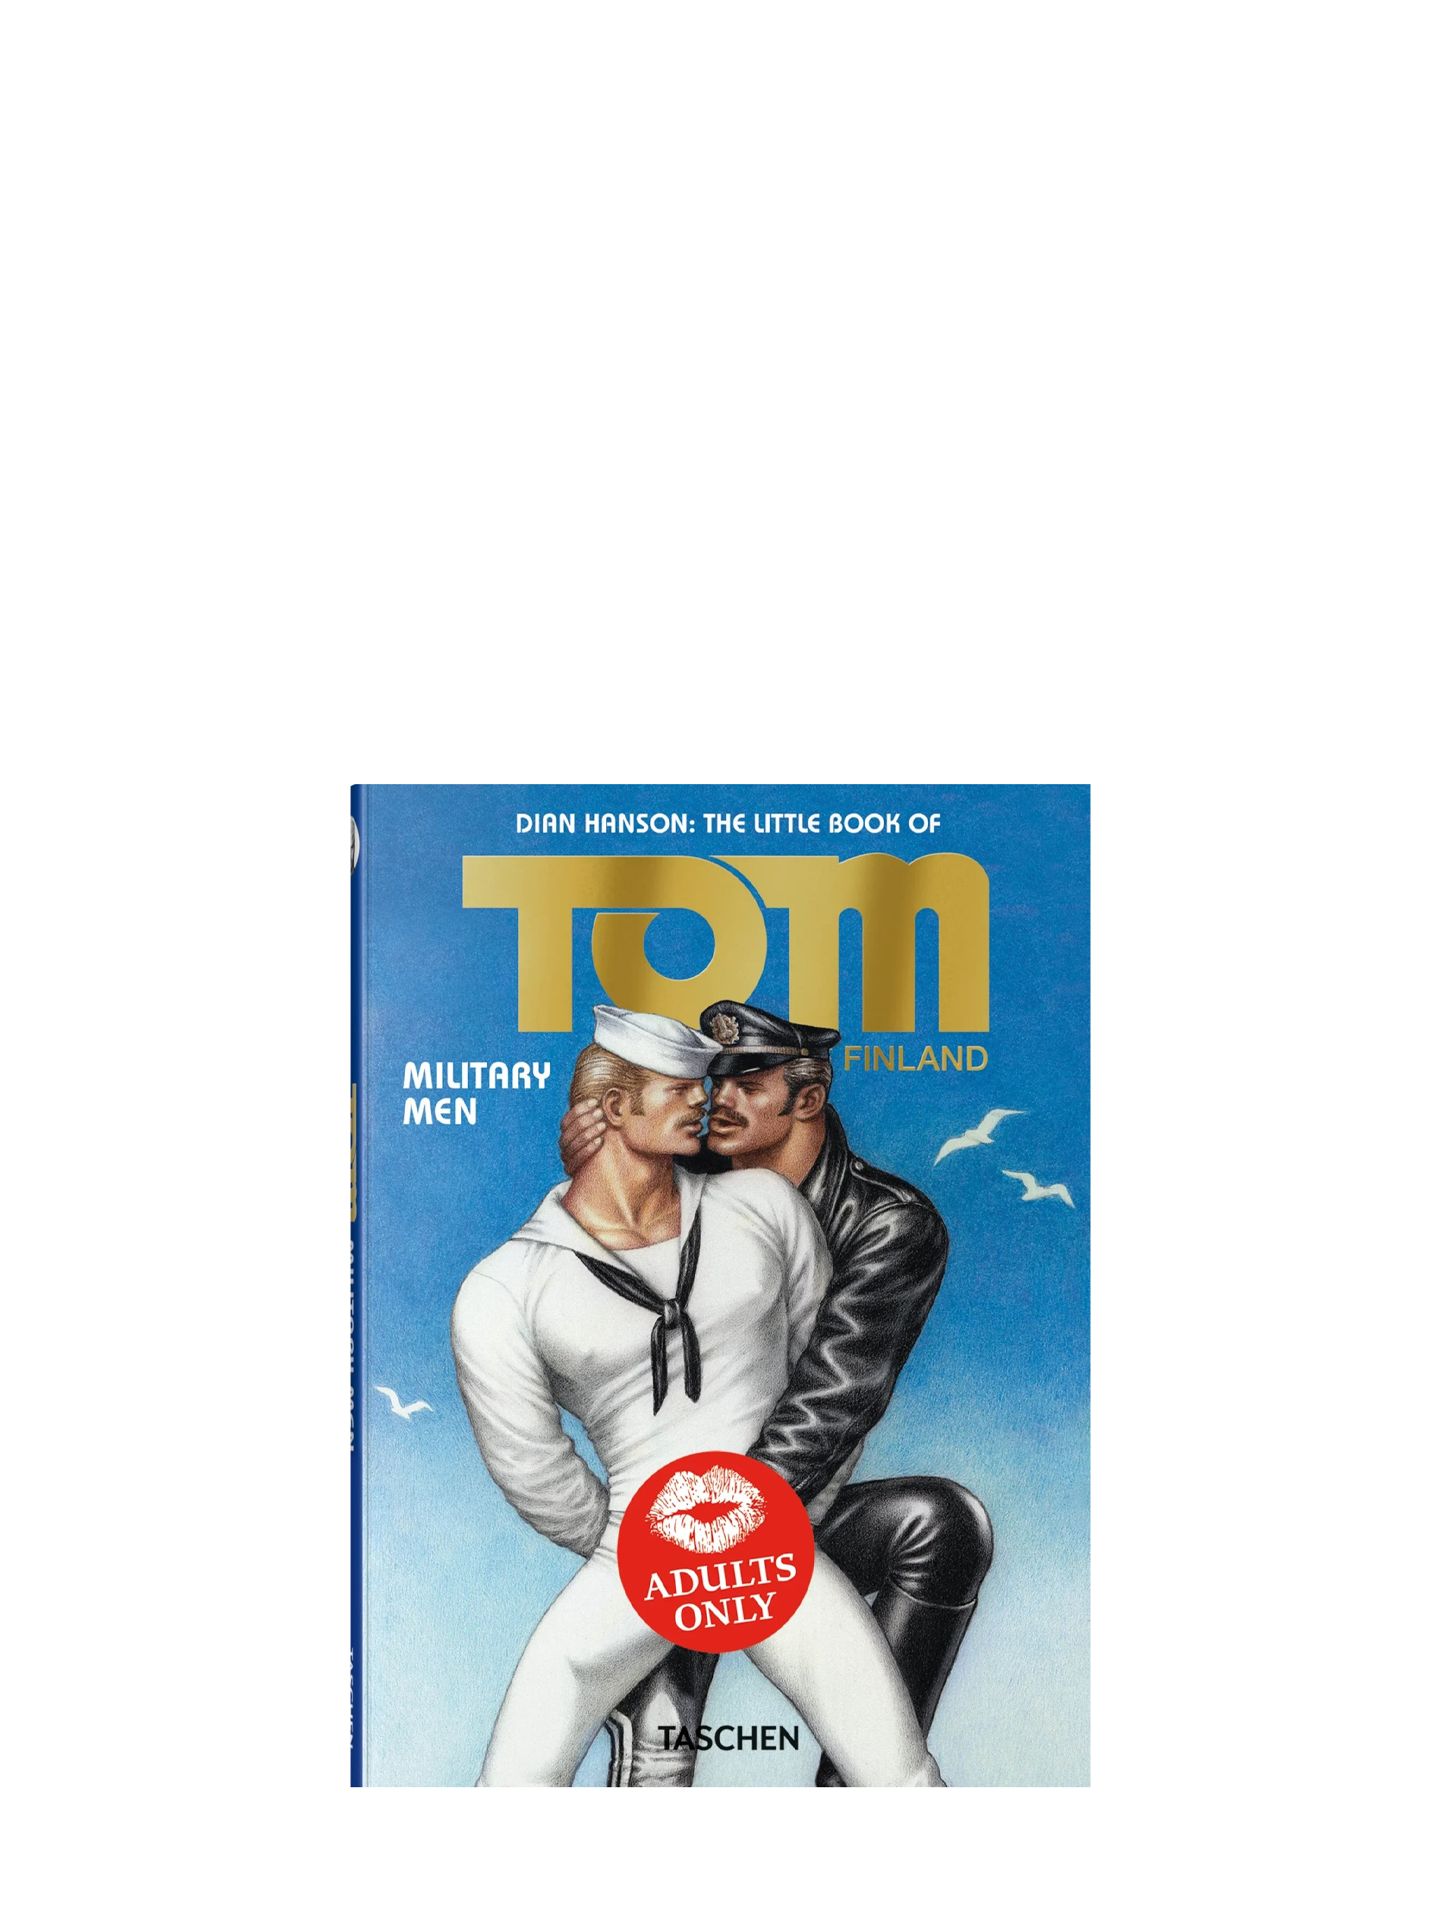 Little Book Of Tom of Finland – Military Men